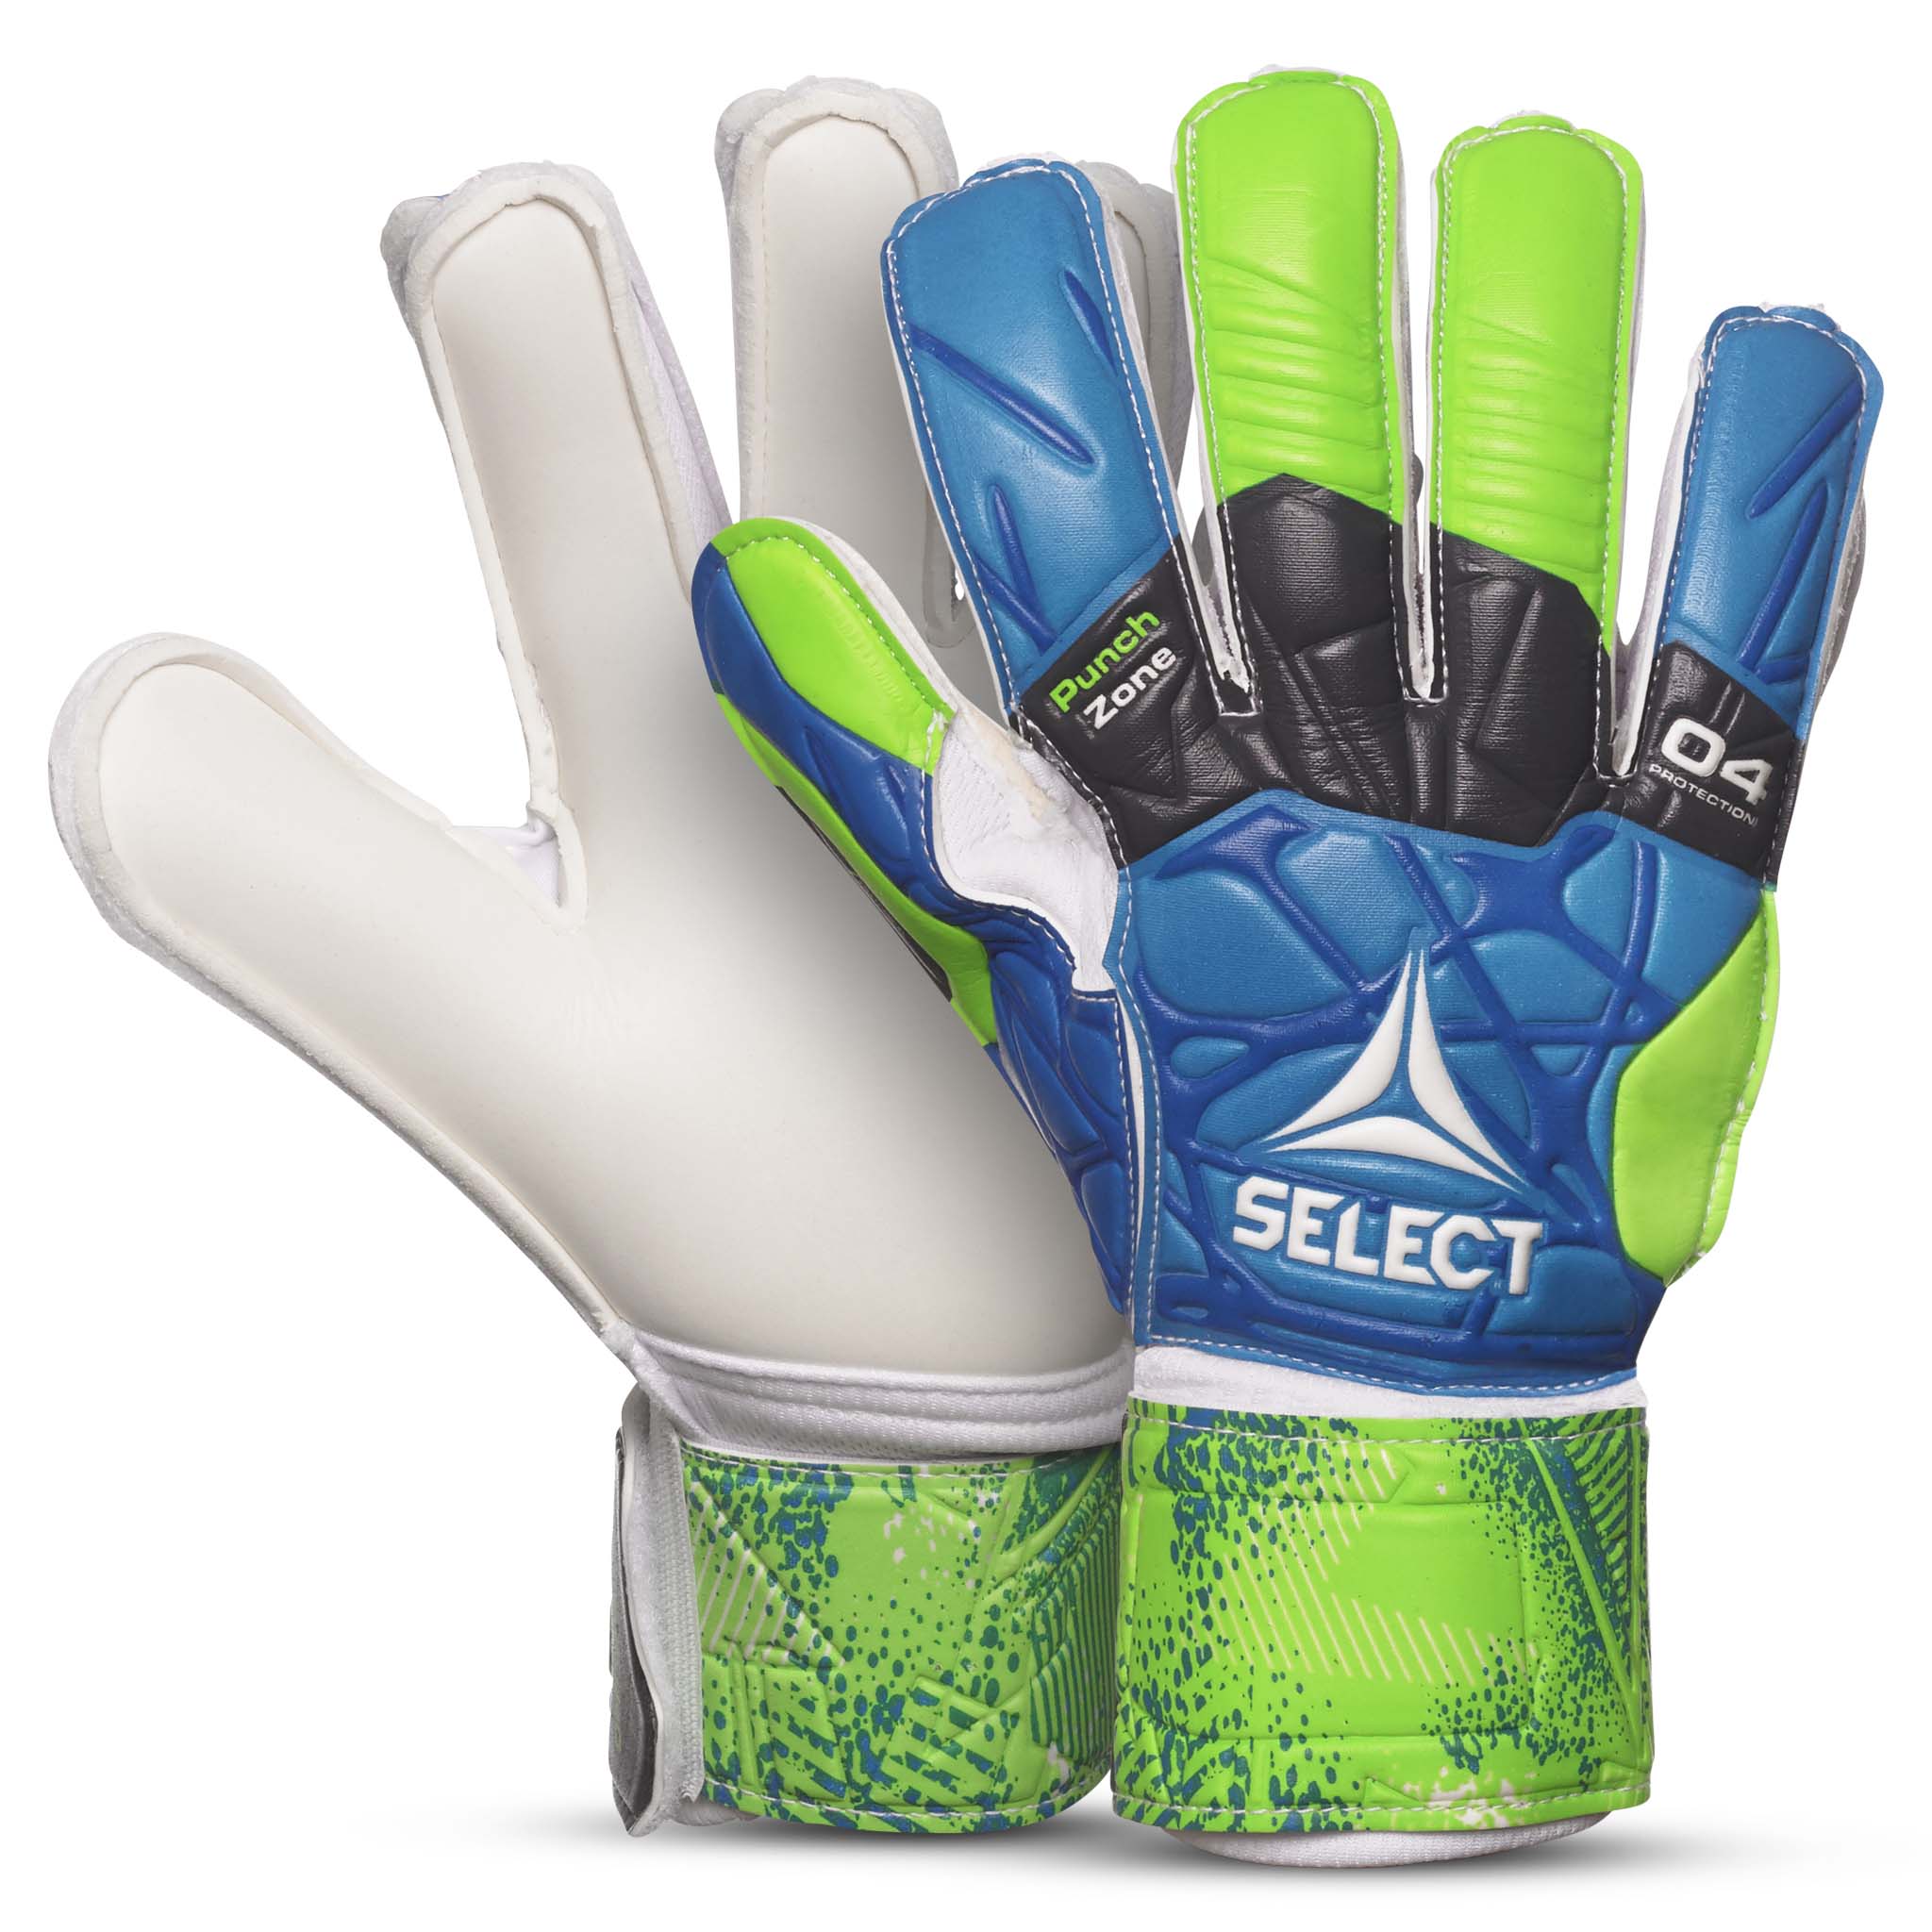 Goalkeeper gloves - 04 Protection Flat cut #colour_blue/green/white